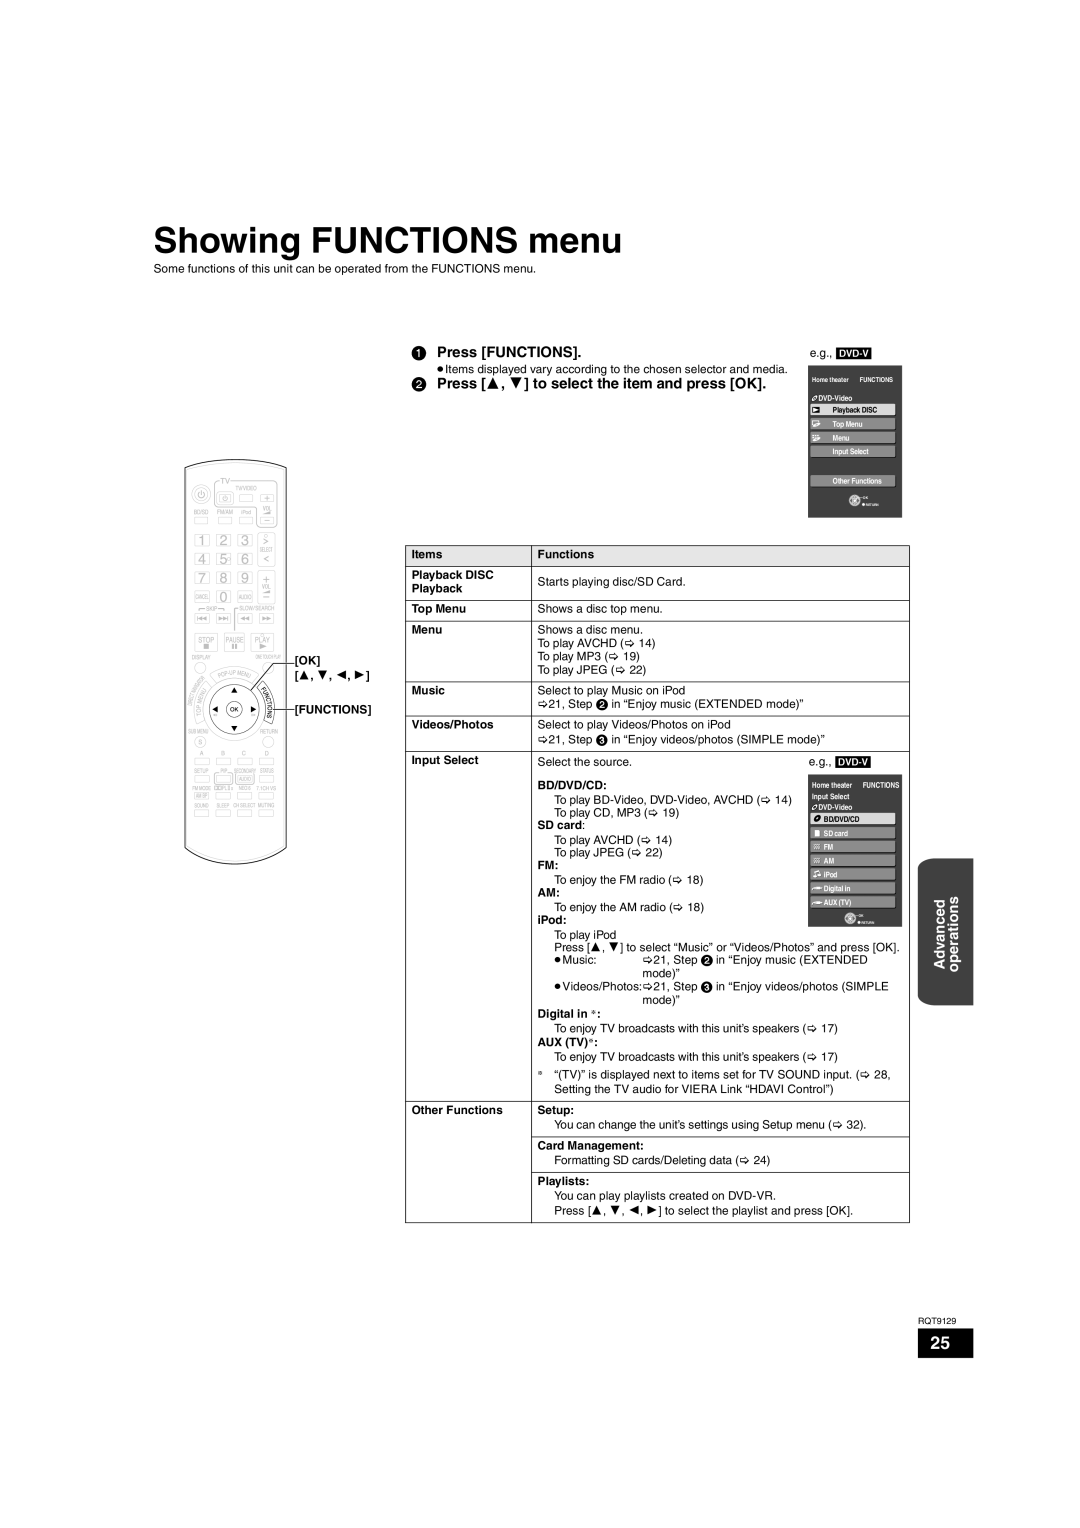 Panasonic SC-BT100 warranty Showing FUNCTIONS menu, 1Press FUNCTIONS, 2Press 3, 4 to select the item and press OK 